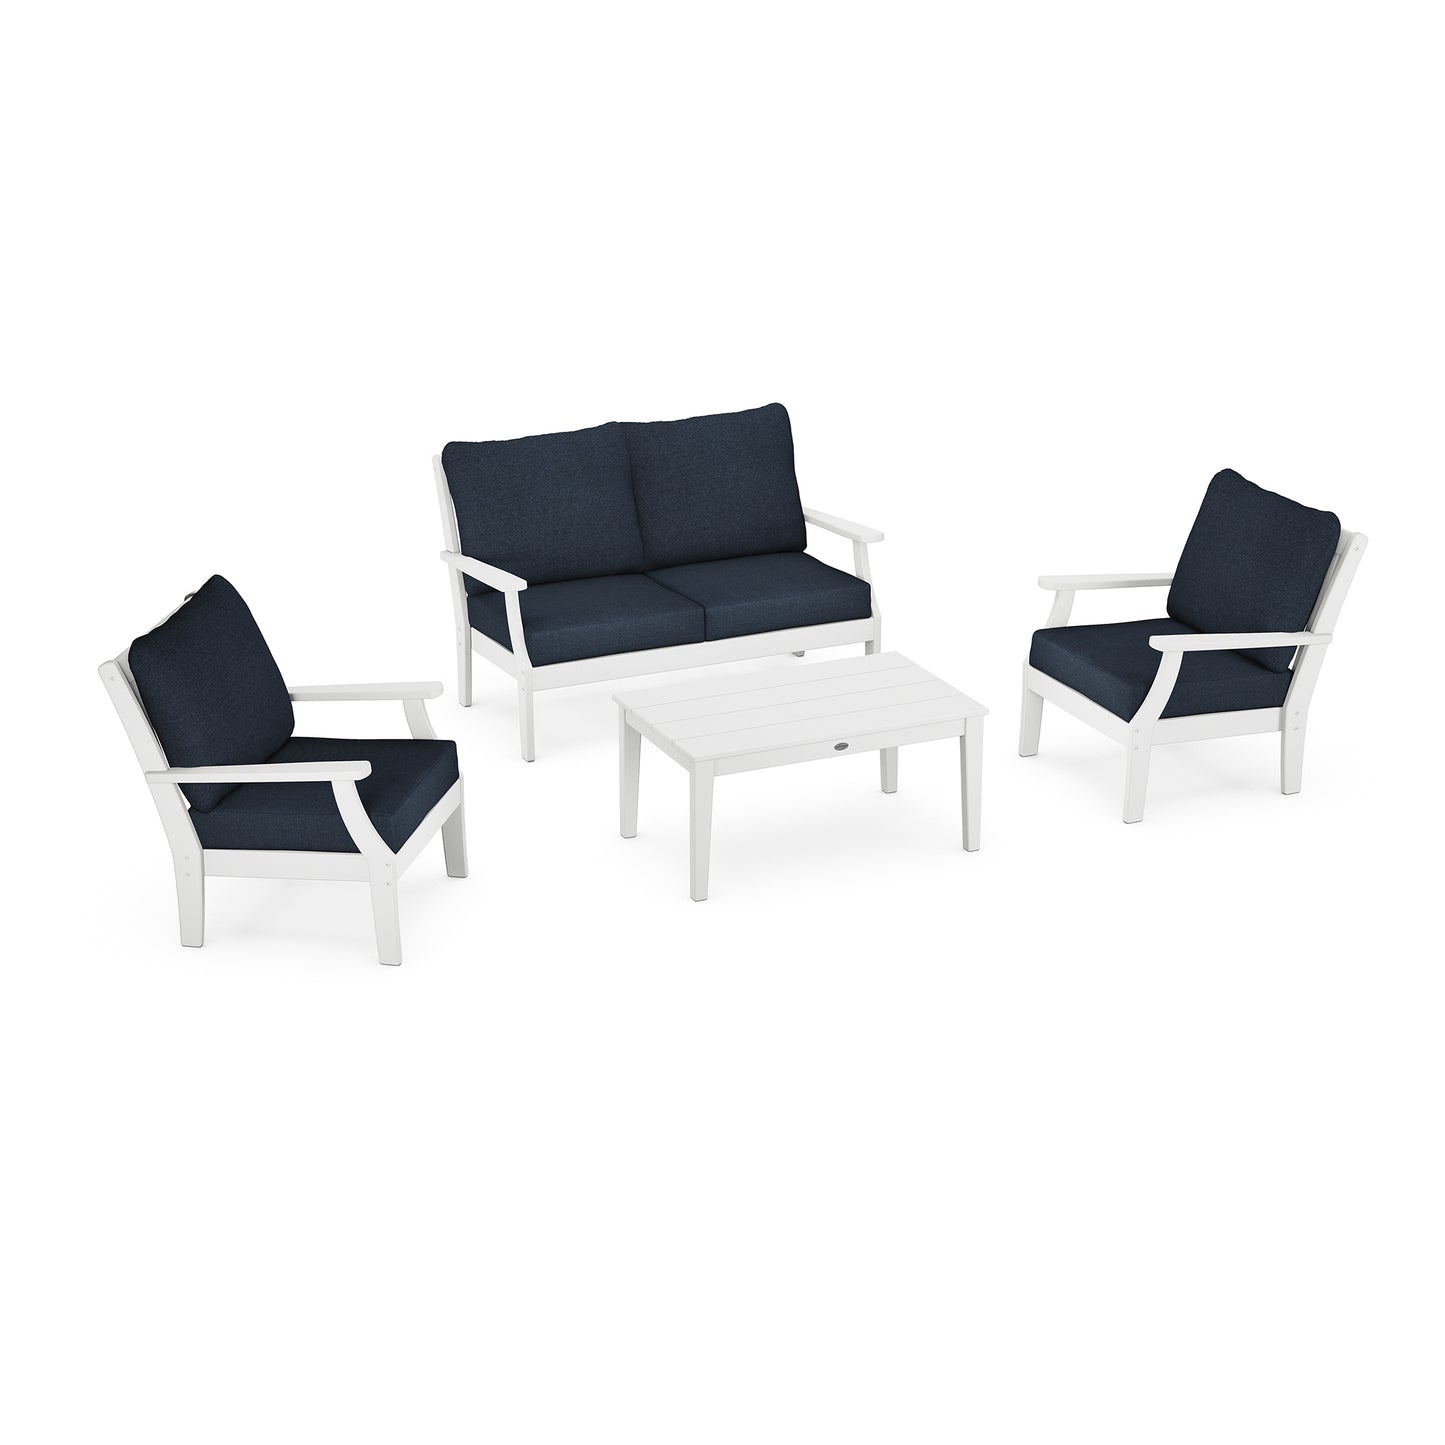 A modern POLYWOOD Braxton 4-Piece Deep Seating Chair Set including two chairs, a loveseat, and a coffee table, all made from POLYWOOD® recycled plastic lumber with dark blue